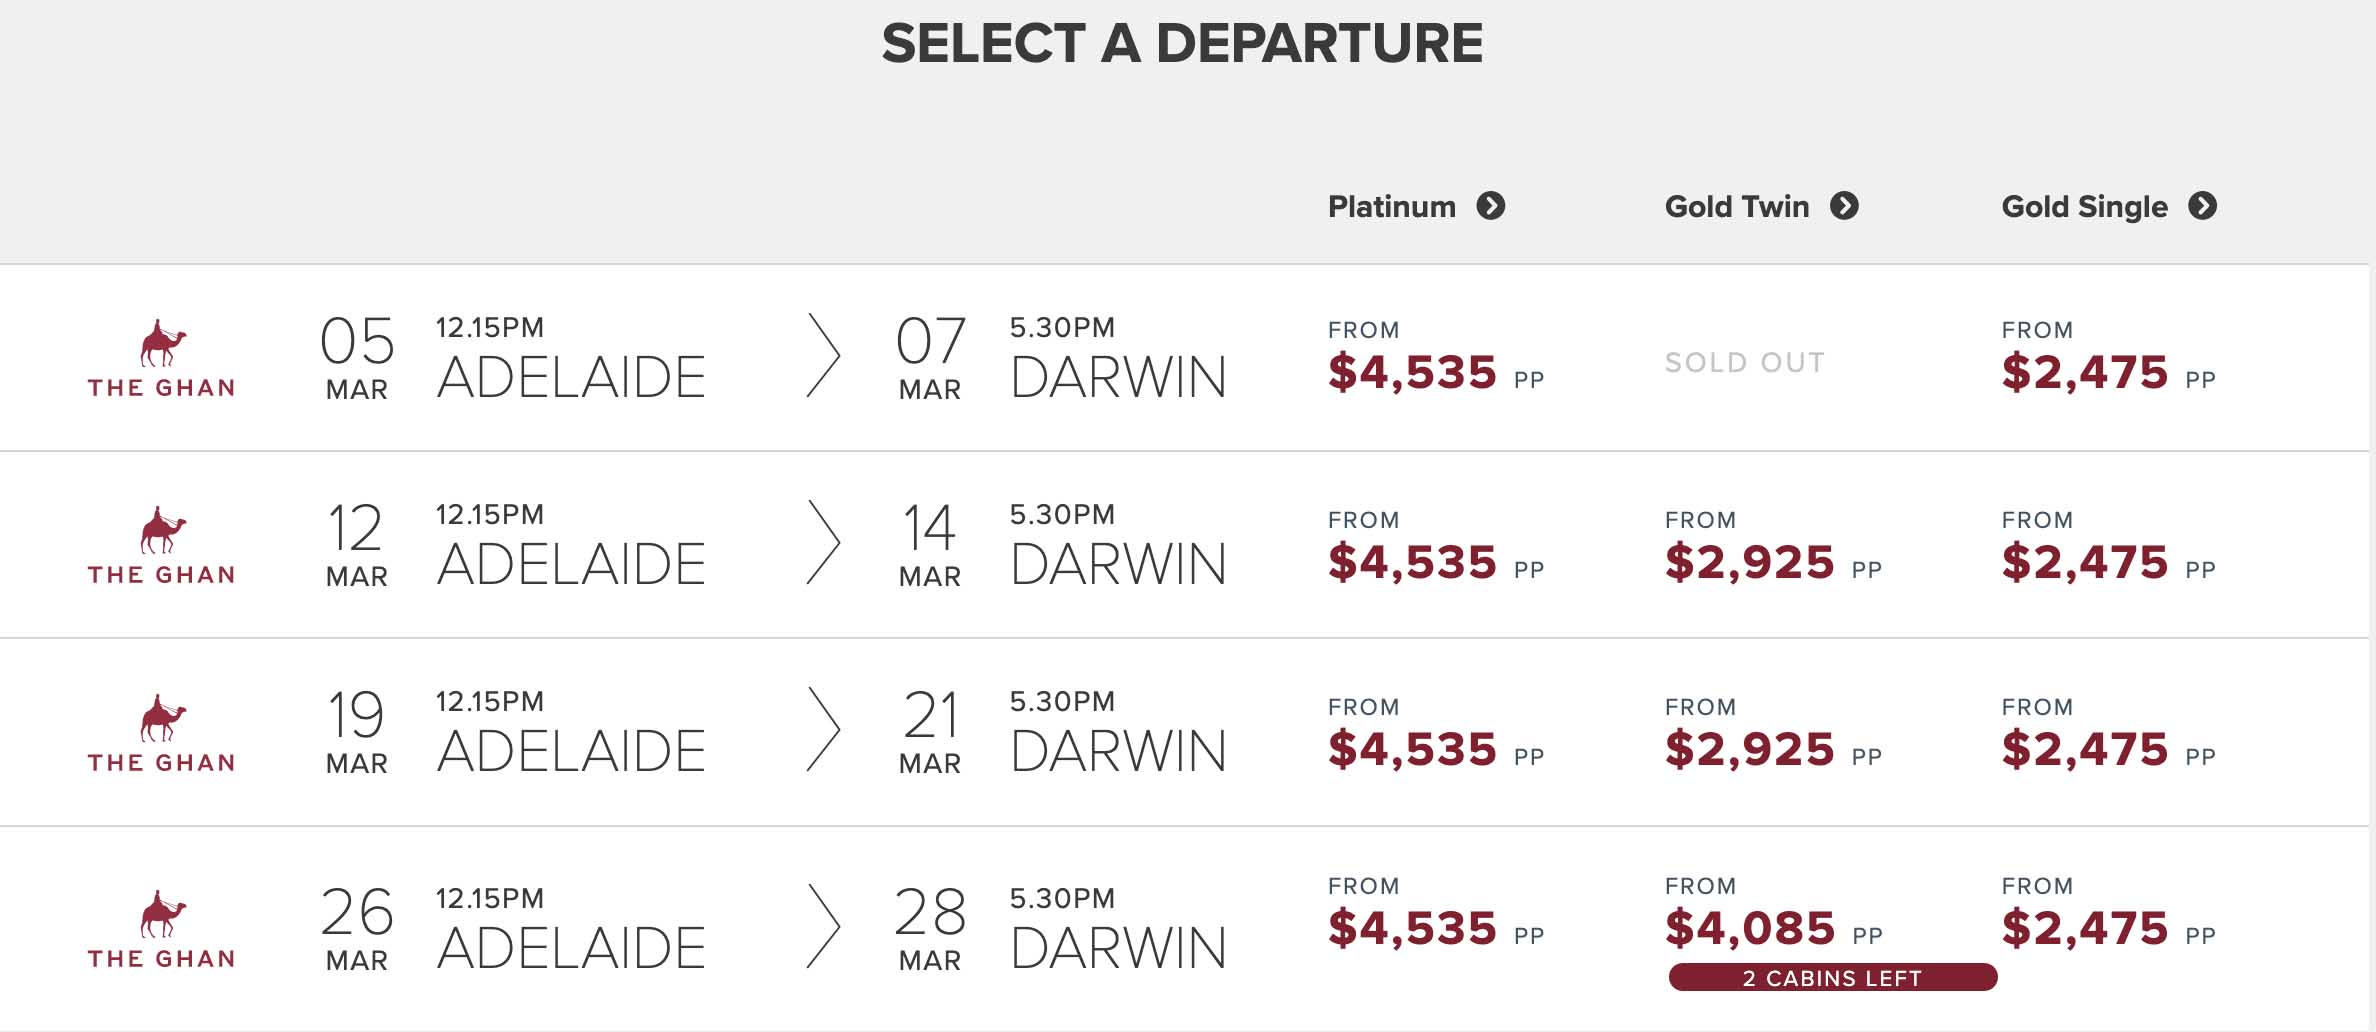 GHAN ADL to DRW prices